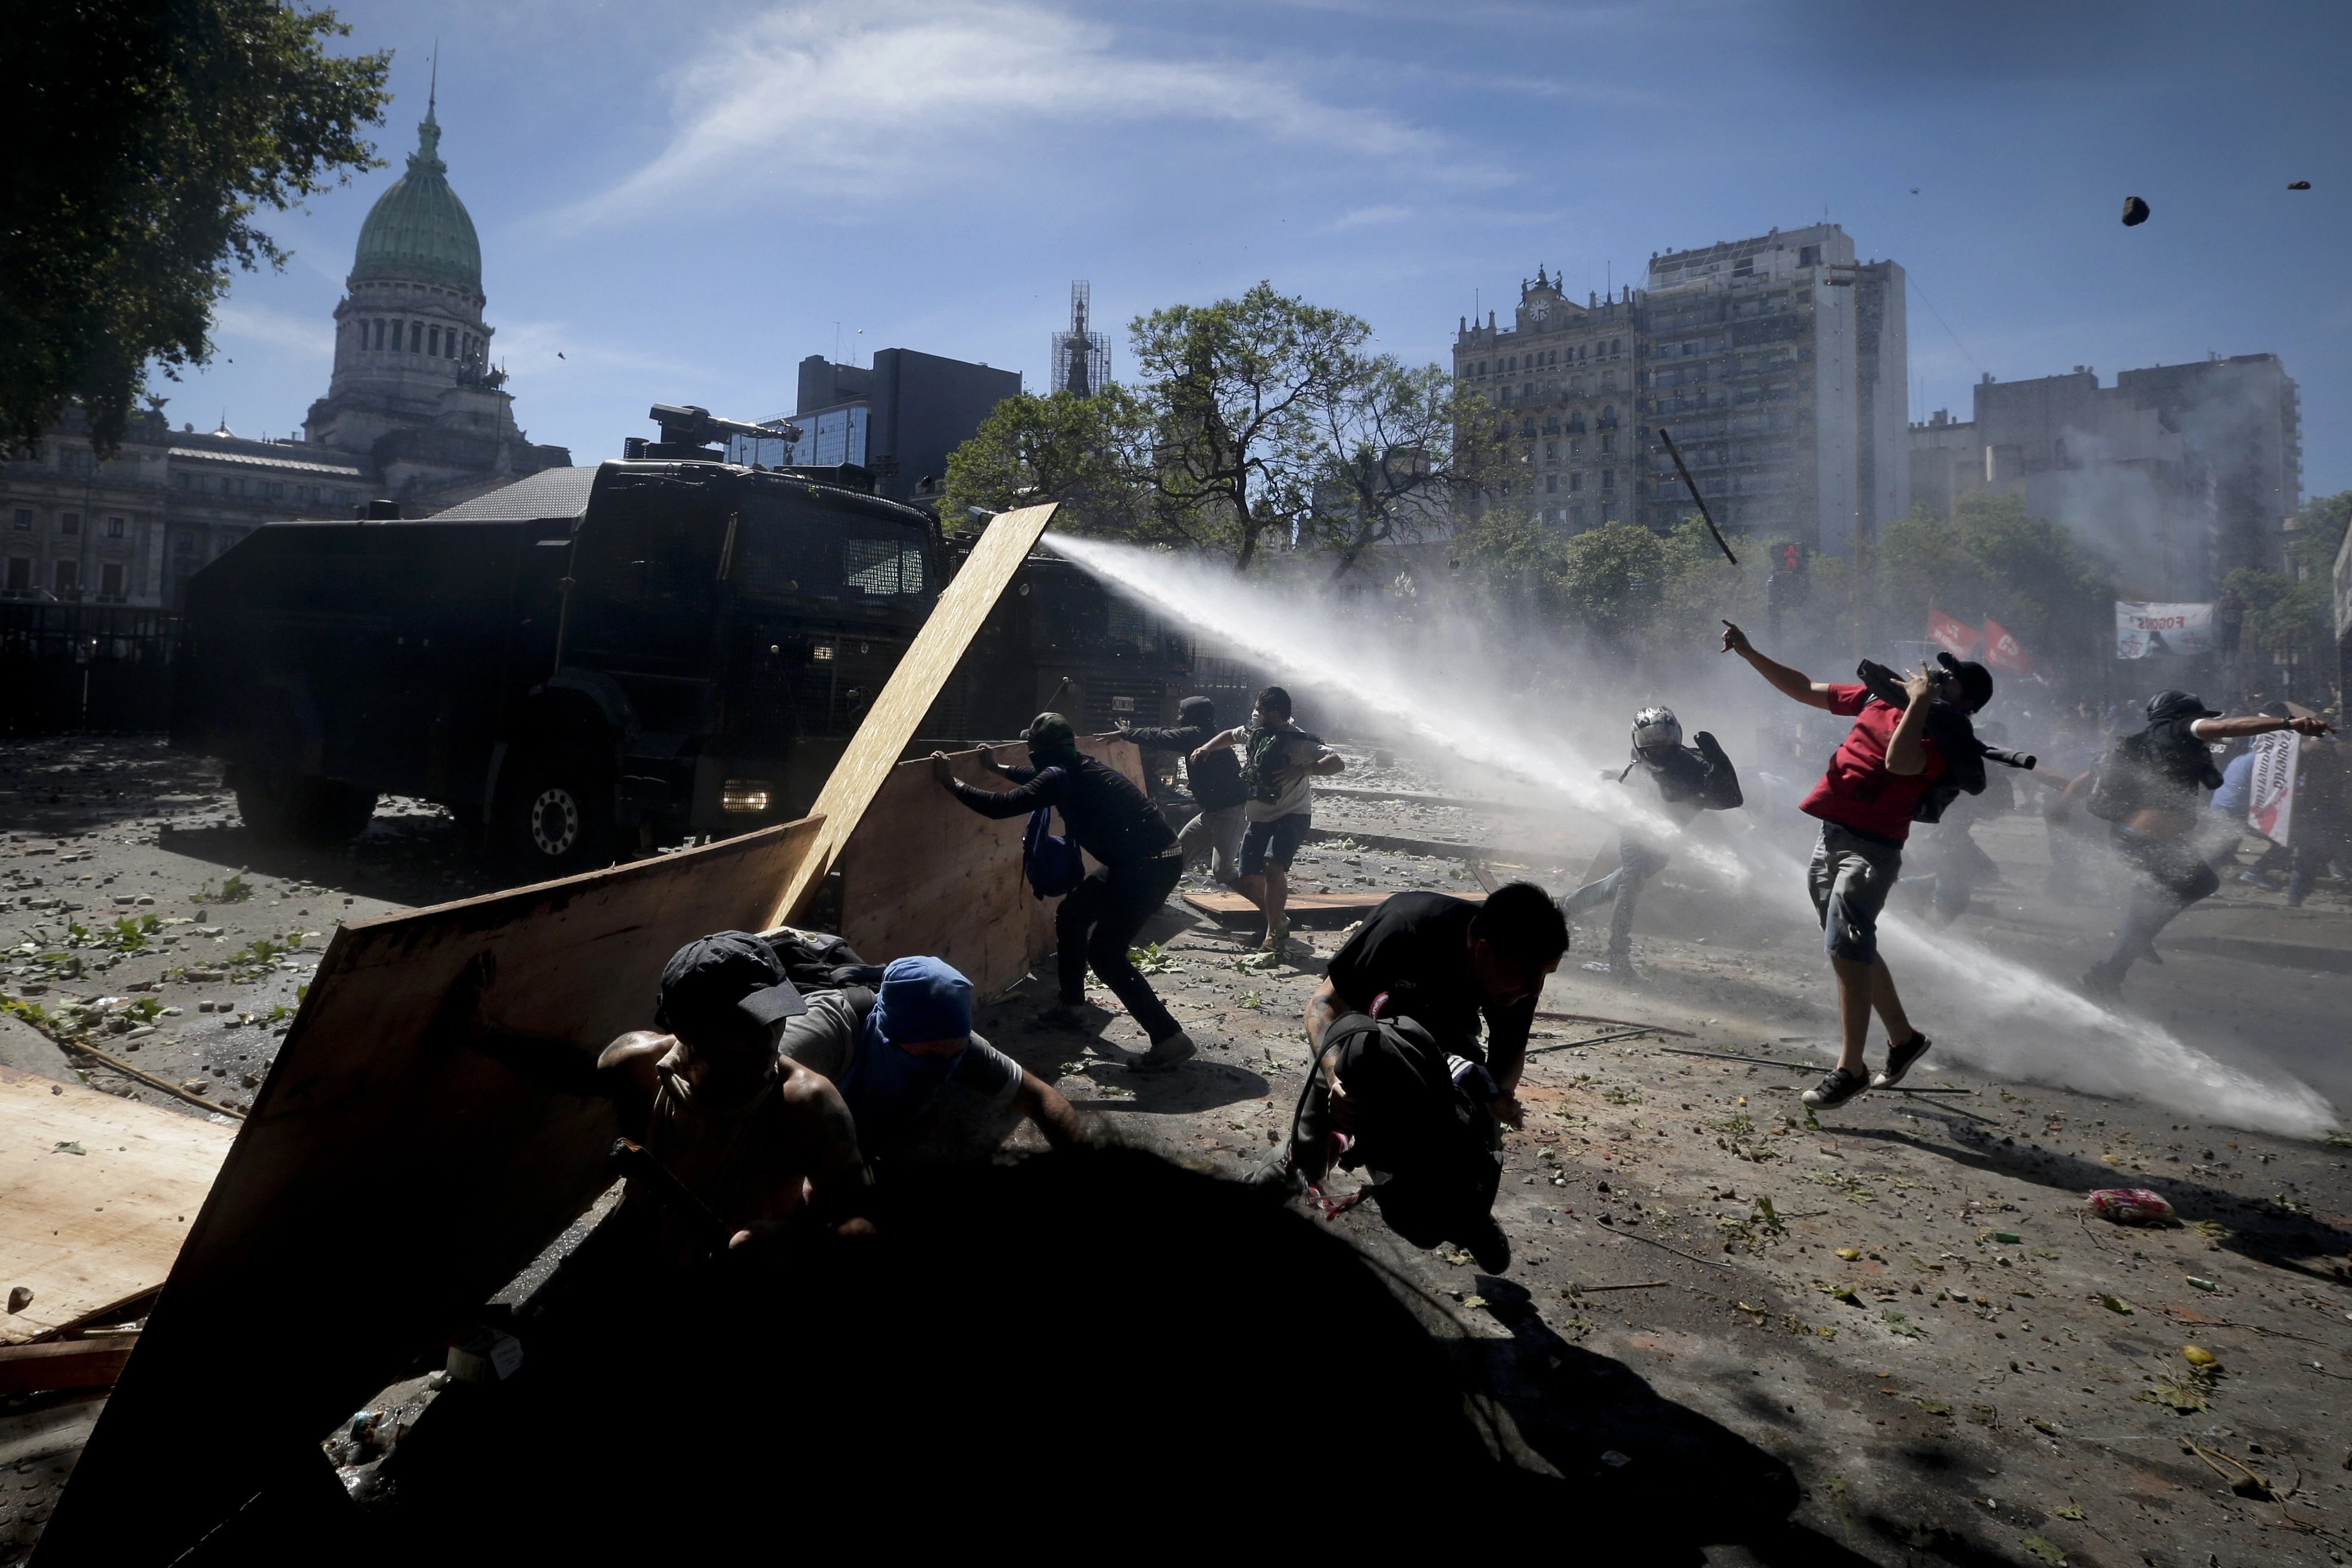 Protesters clash with police during a general strike against a pension reform measure, outside Congress in Buenos Aires, Argentina, Monday, Dec. 18, 2017. Union leaders complain the legislation, which already passed in the Senate, would cut pension and retirement payments as well as aid for some of poor families. (AP Photo/Victor R. Caivano)